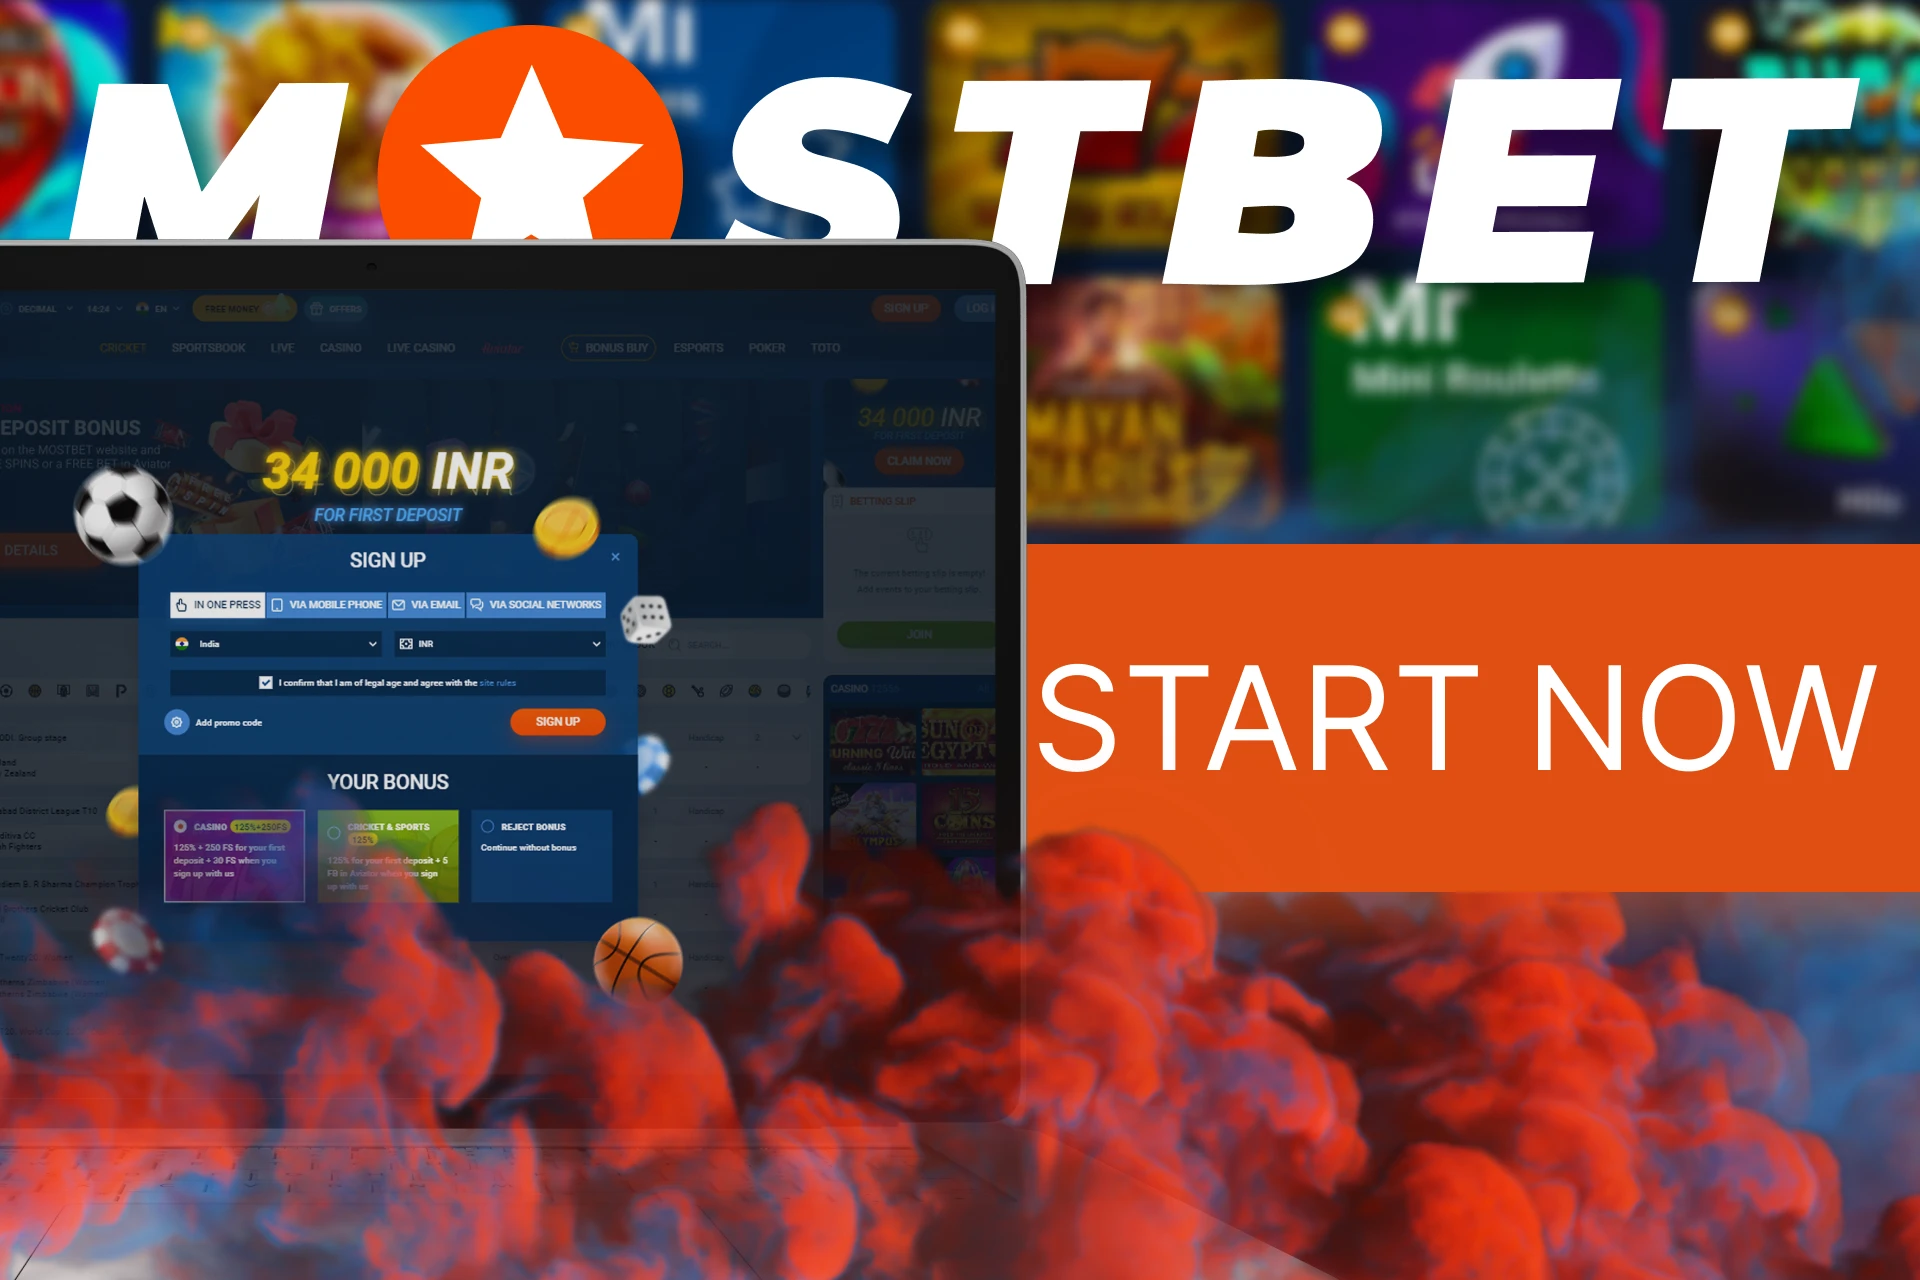 Start playing mines game quickly and easily at Mostbet.